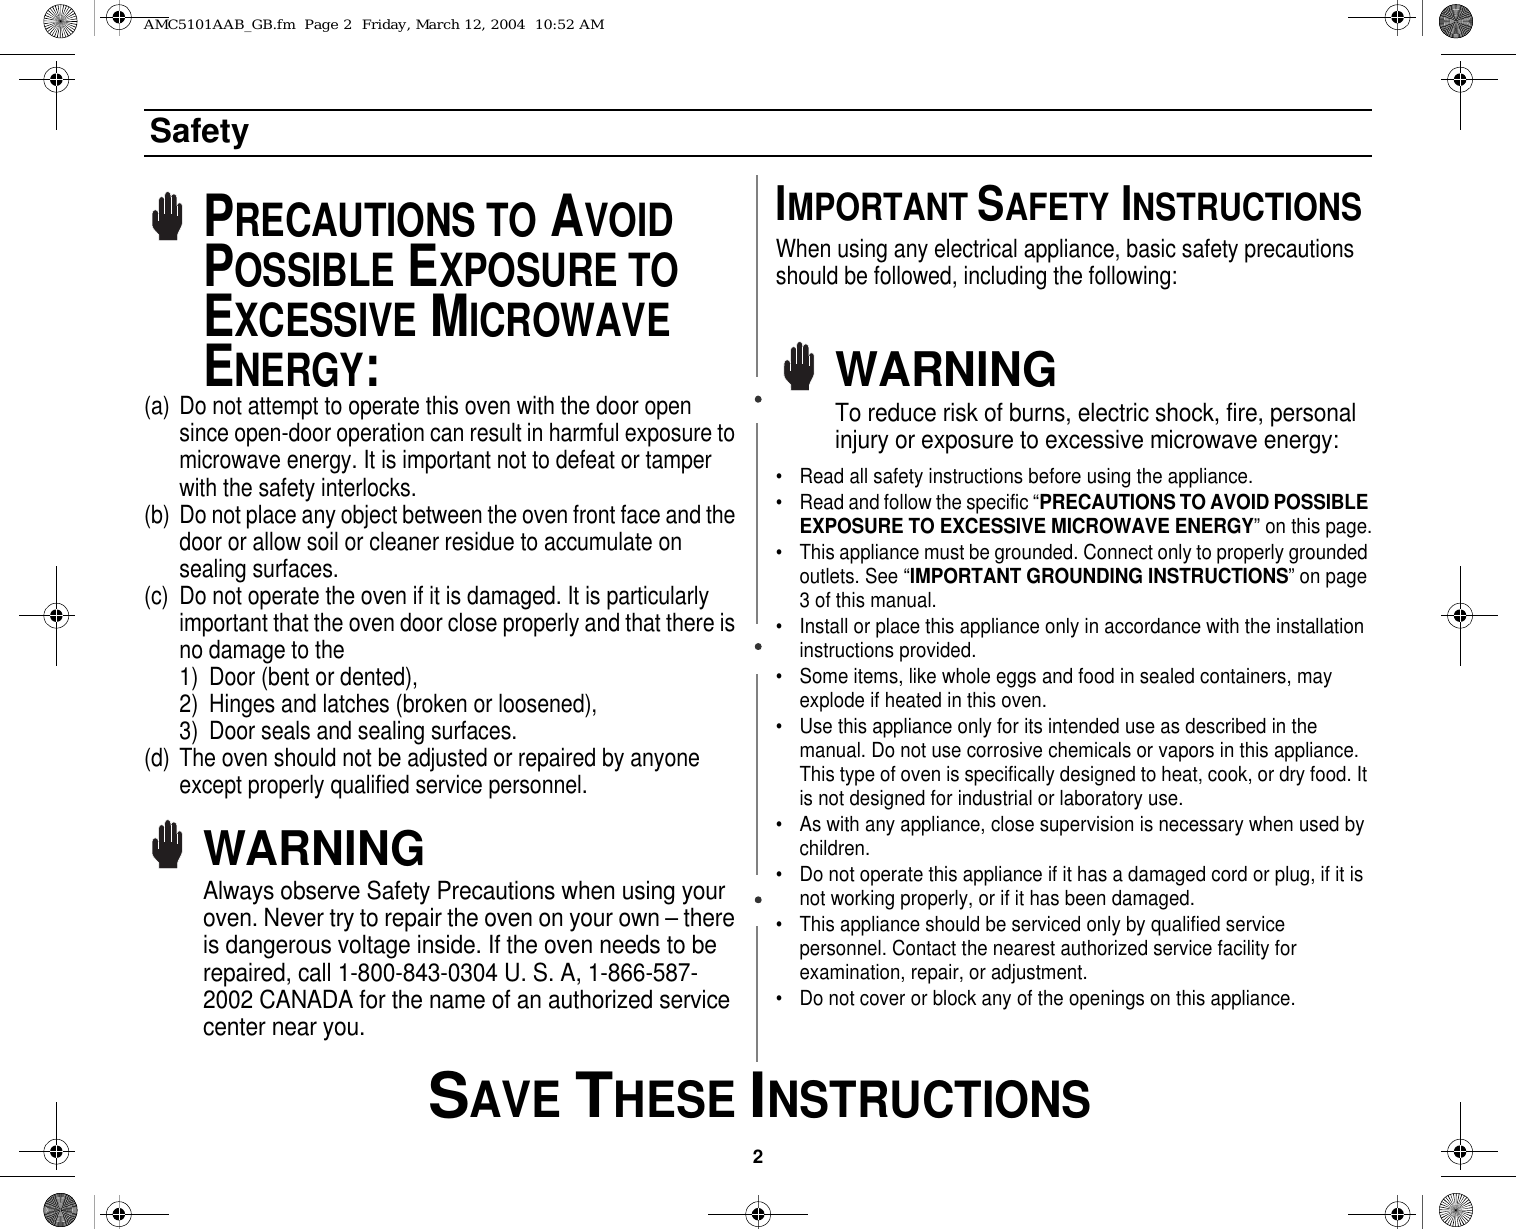 2 SAVE THESE INSTRUCTIONSSafetyPRECAUTIONS TO AVOID POSSIBLE EXPOSURE TO EXCESSIVE MICROWAVE ENERGY:(a) Do not attempt to operate this oven with the door open since open-door operation can result in harmful exposure to microwave energy. It is important not to defeat or tamper with the safety interlocks.(b) Do not place any object between the oven front face and the door or allow soil or cleaner residue to accumulate on sealing surfaces.(c) Do not operate the oven if it is damaged. It is particularly important that the oven door close properly and that there is no damage to the 1) Door (bent or dented), 2) Hinges and latches (broken or loosened), 3) Door seals and sealing surfaces.(d) The oven should not be adjusted or repaired by anyone except properly qualified service personnel.WARNINGAlways observe Safety Precautions when using your oven. Never try to repair the oven on your own – there is dangerous voltage inside. If the oven needs to be repaired, call 1-800-843-0304 U. S. A, 1-866-587-2002 CANADA for the name of an authorized service center near you.IMPORTANT SAFETY INSTRUCTIONSWhen using any electrical appliance, basic safety precautions should be followed, including the following:WARNINGTo reduce risk of burns, electric shock, fire, personal injury or exposure to excessive microwave energy:• Read all safety instructions before using the appliance.• Read and follow the specific “PRECAUTIONS TO AVOID POSSIBLE EXPOSURE TO EXCESSIVE MICROWAVE ENERGY” on this page.• This appliance must be grounded. Connect only to properly grounded outlets. See “IMPORTANT GROUNDING INSTRUCTIONS” on page 3 of this manual. • Install or place this appliance only in accordance with the installation instructions provided.• Some items, like whole eggs and food in sealed containers, may explode if heated in this oven.• Use this appliance only for its intended use as described in the manual. Do not use corrosive chemicals or vapors in this appliance. This type of oven is specifically designed to heat, cook, or dry food. It is not designed for industrial or laboratory use.• As with any appliance, close supervision is necessary when used by children.• Do not operate this appliance if it has a damaged cord or plug, if it is not working properly, or if it has been damaged.• This appliance should be serviced only by qualified service personnel. Contact the nearest authorized service facility for examination, repair, or adjustment.• Do not cover or block any of the openings on this appliance.AMC5101AAB_GB.fm  Page 2  Friday, March 12, 2004  10:52 AM